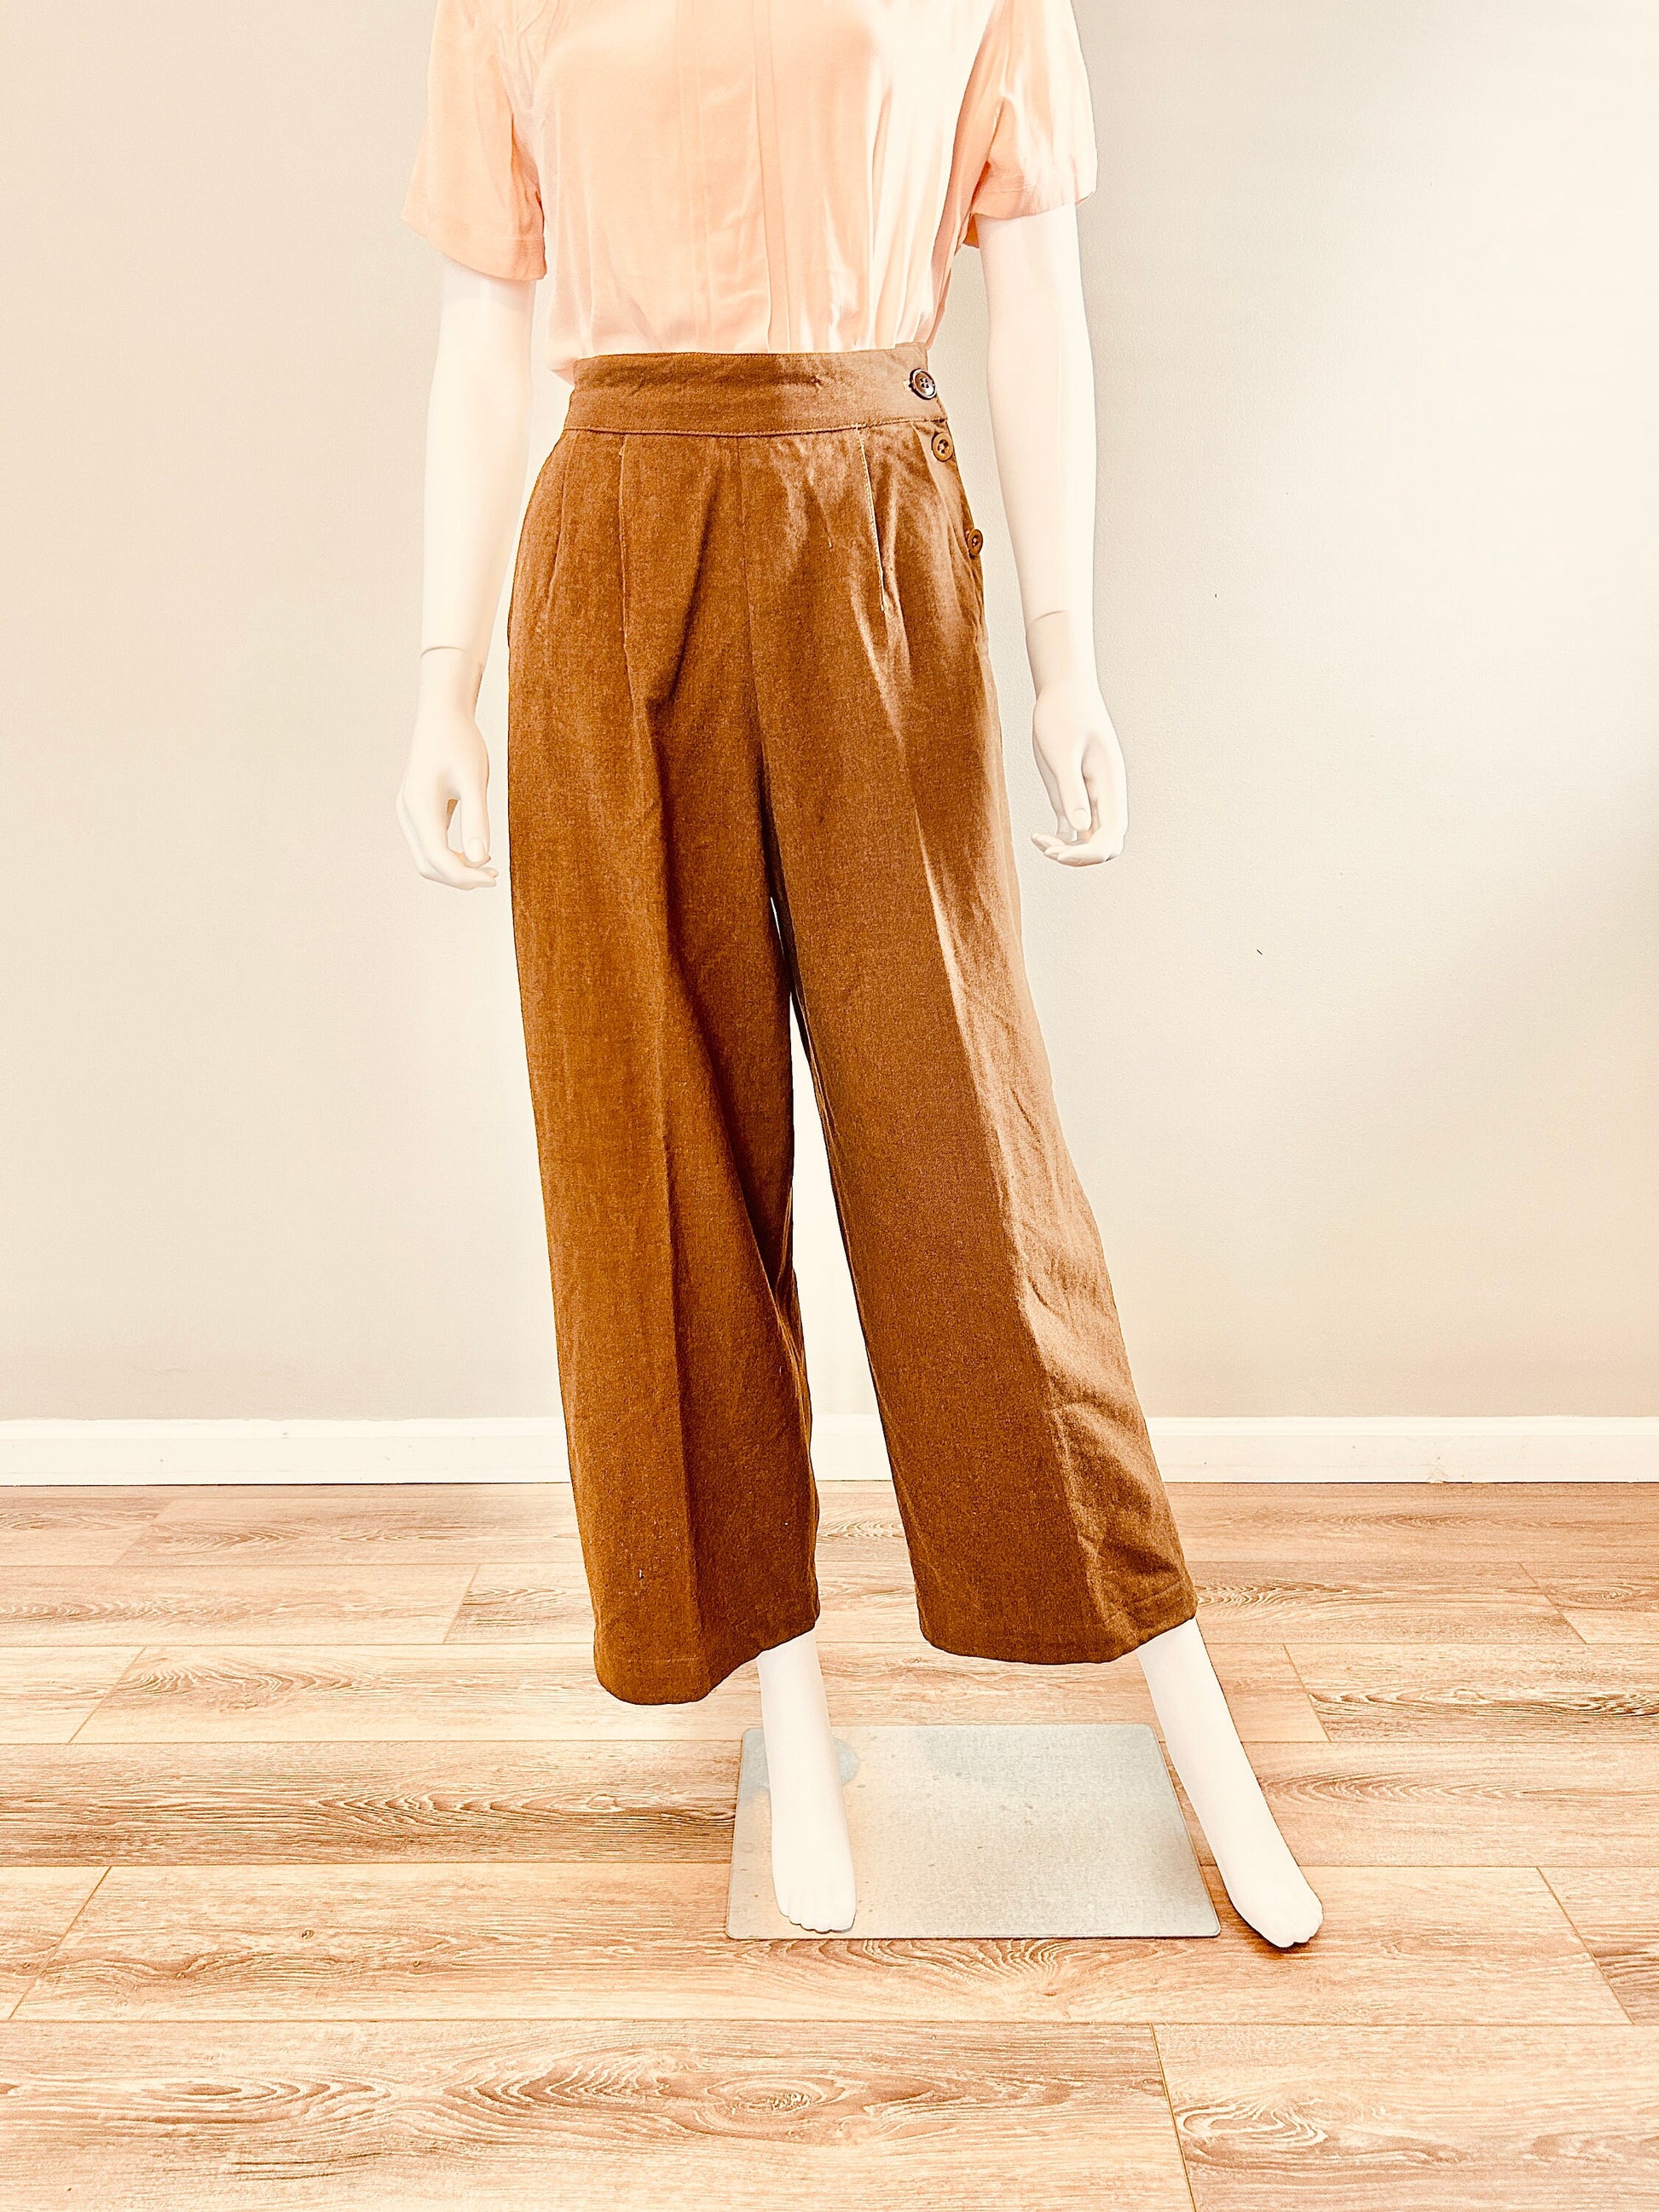 Vintage 1940s Olive Green Wool Pants / 40s WAC WWII Pants / Size XS S